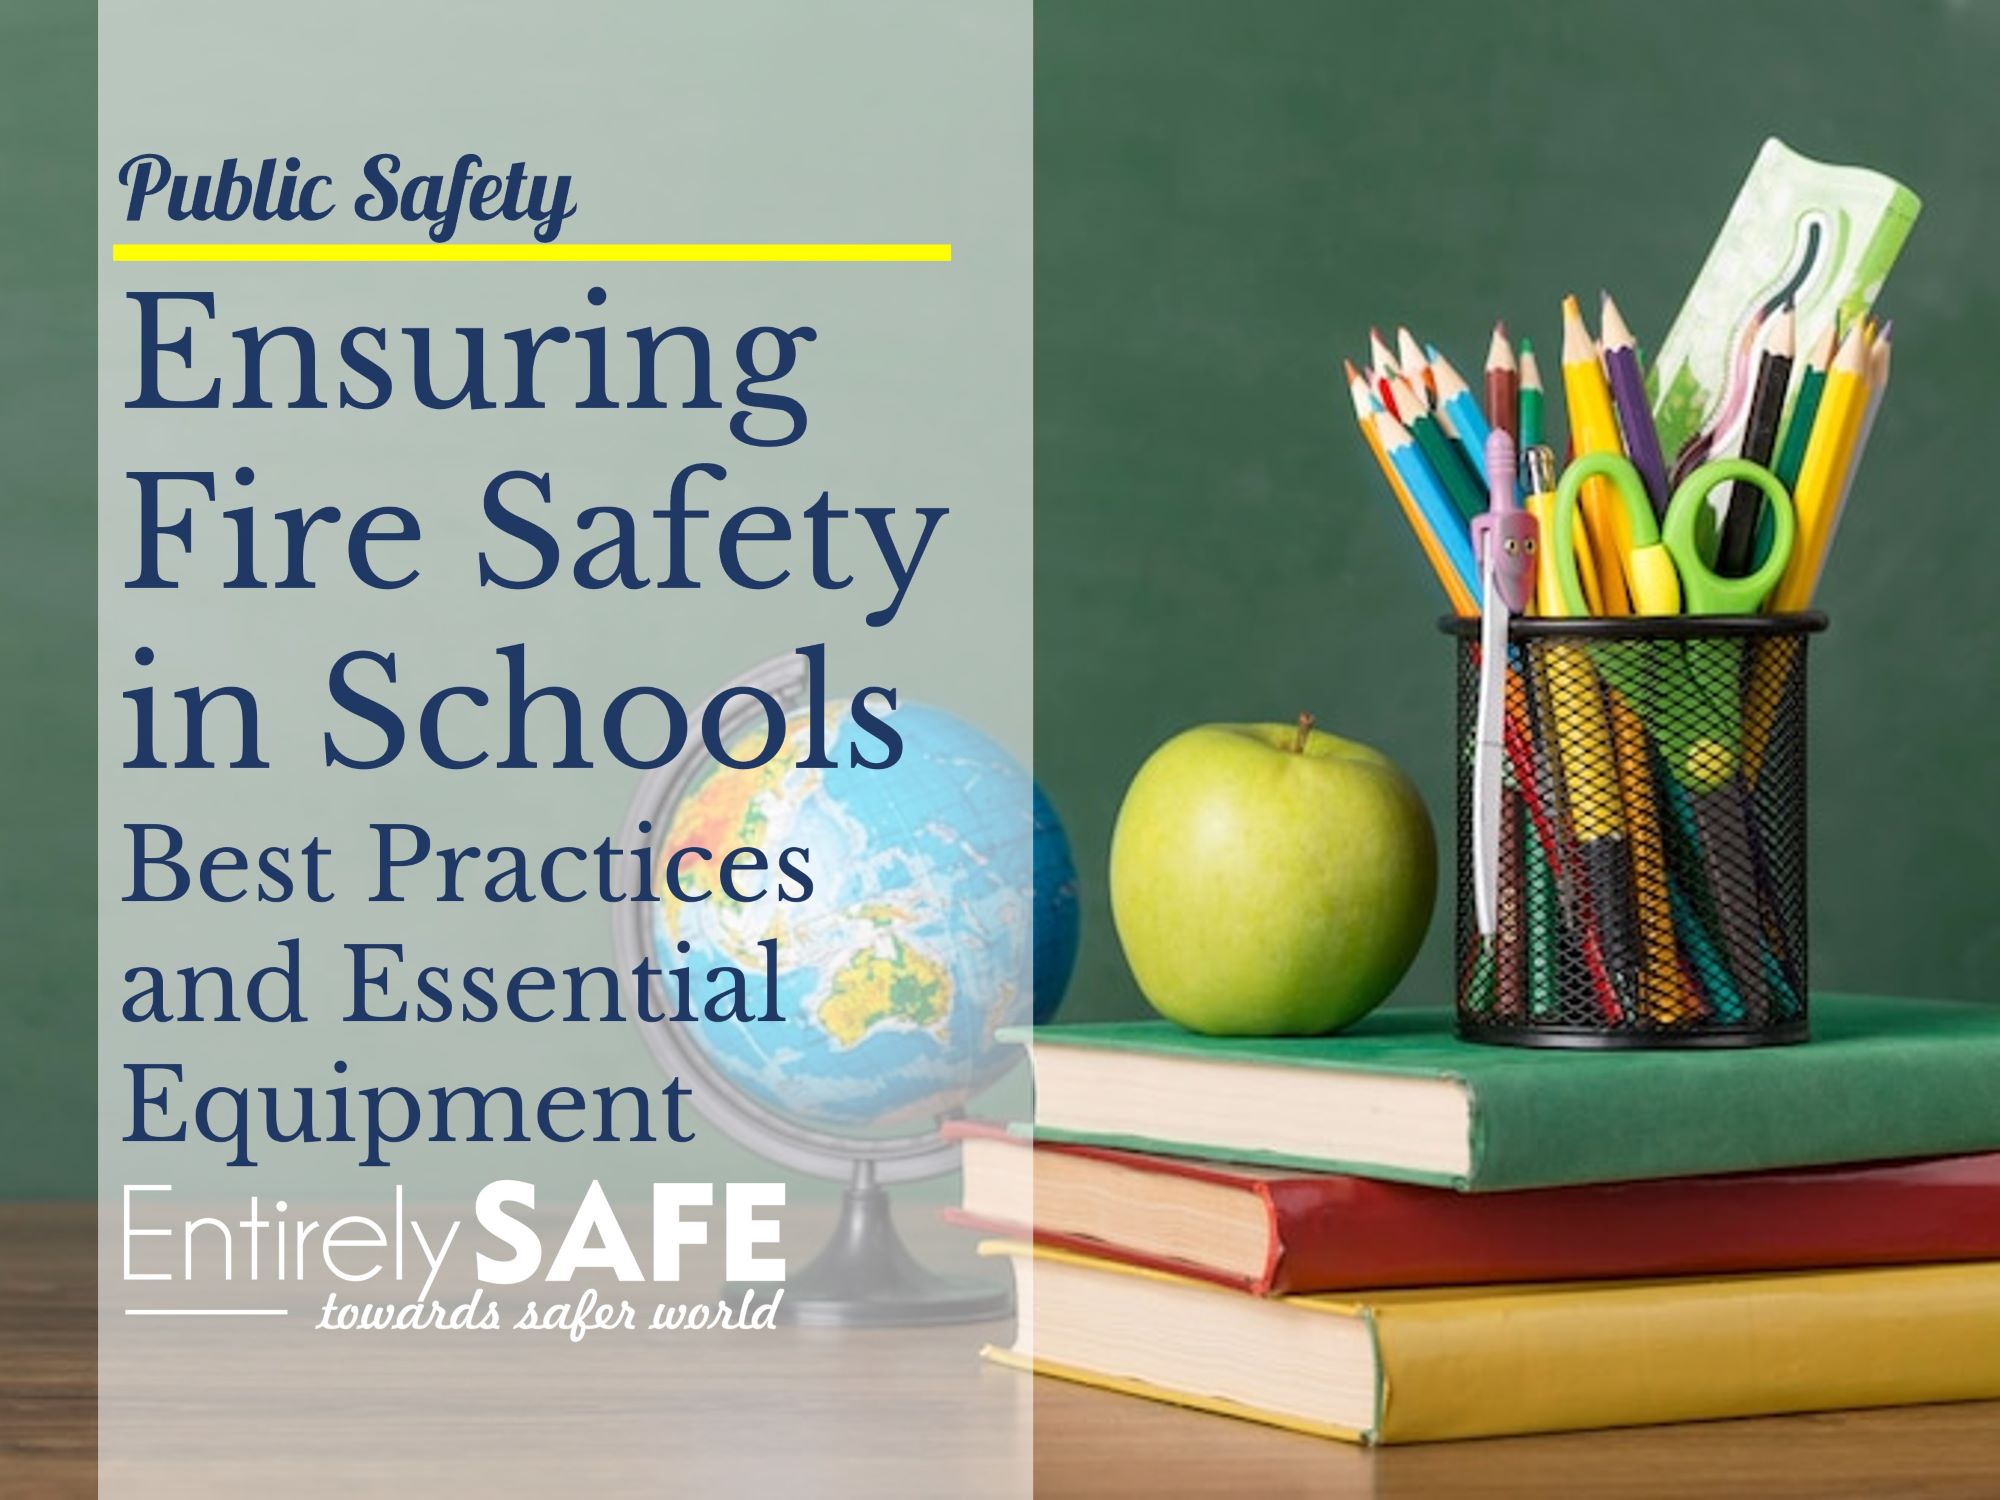 Ensuring Fire Safety in Schools, Best Practices and Essential Equipment